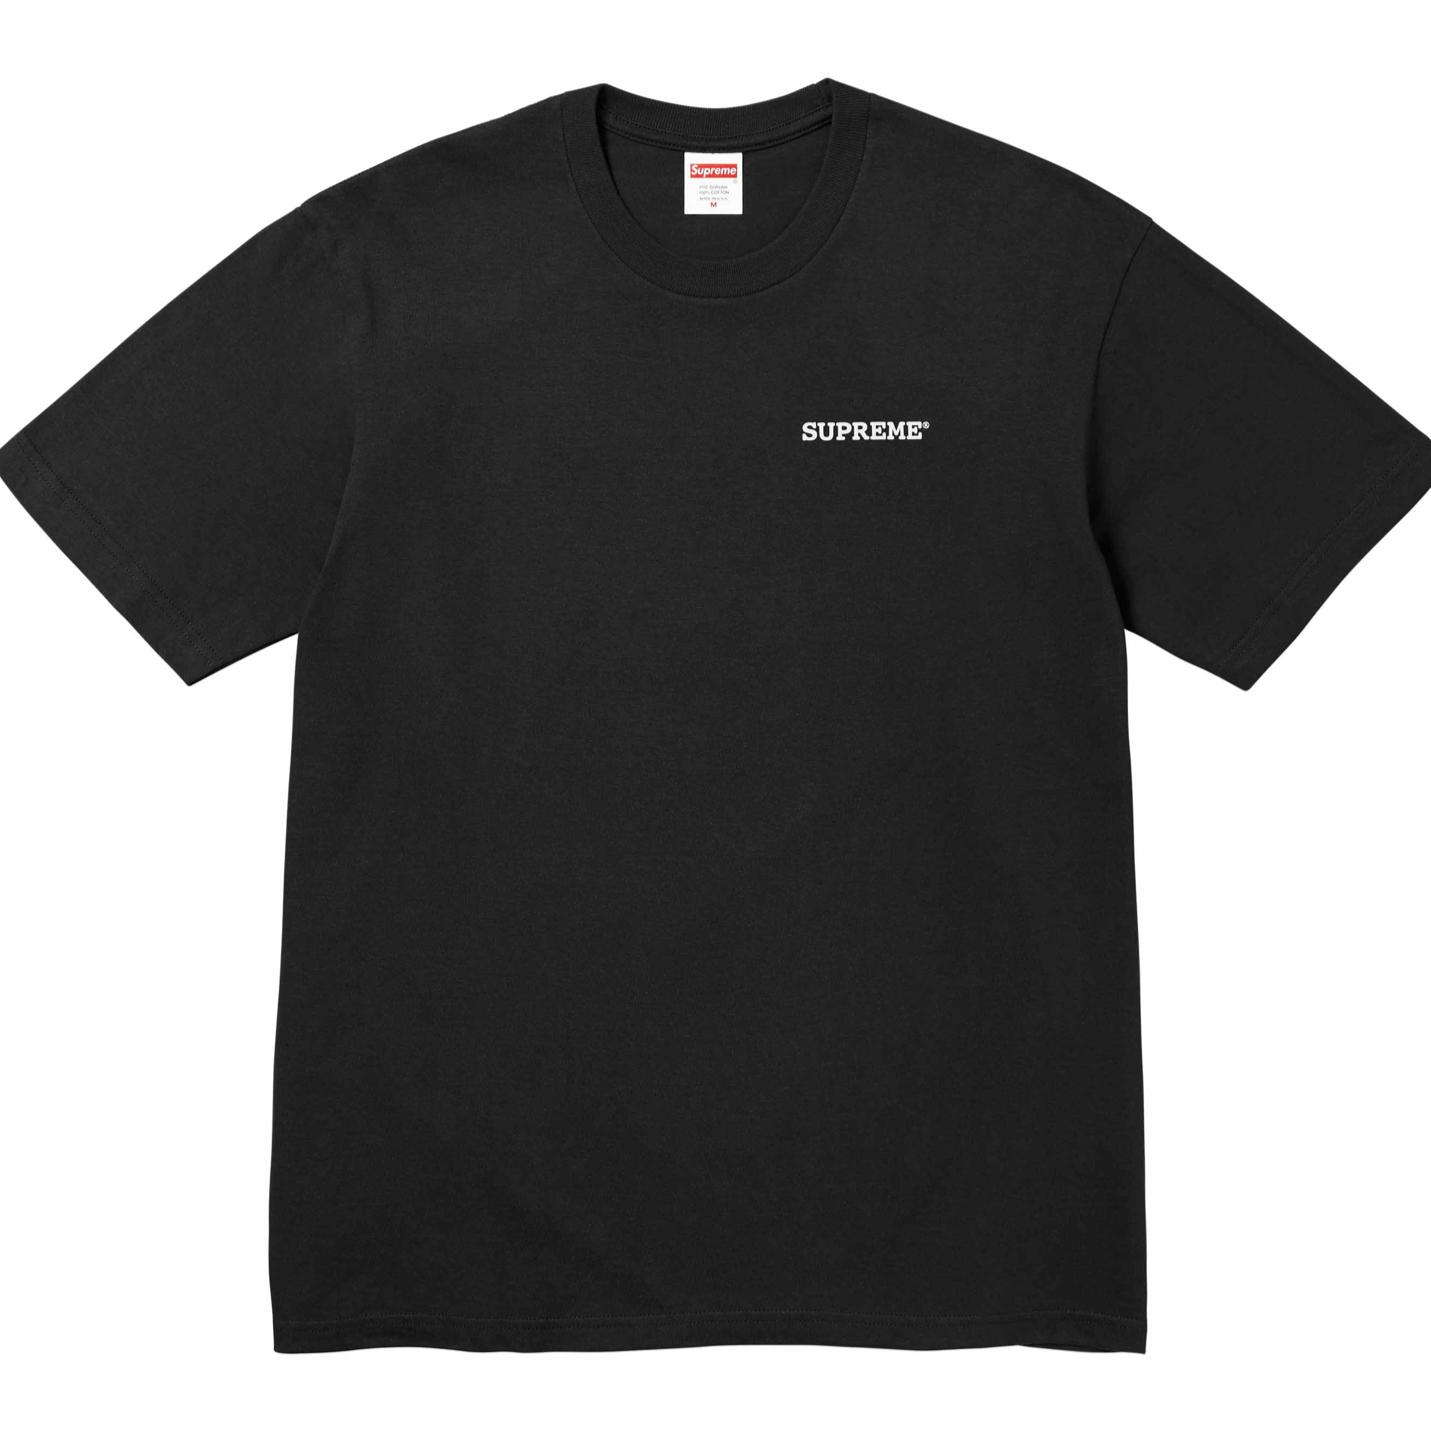 Supreme Patchwork Tee Black by Supreme from £65.00